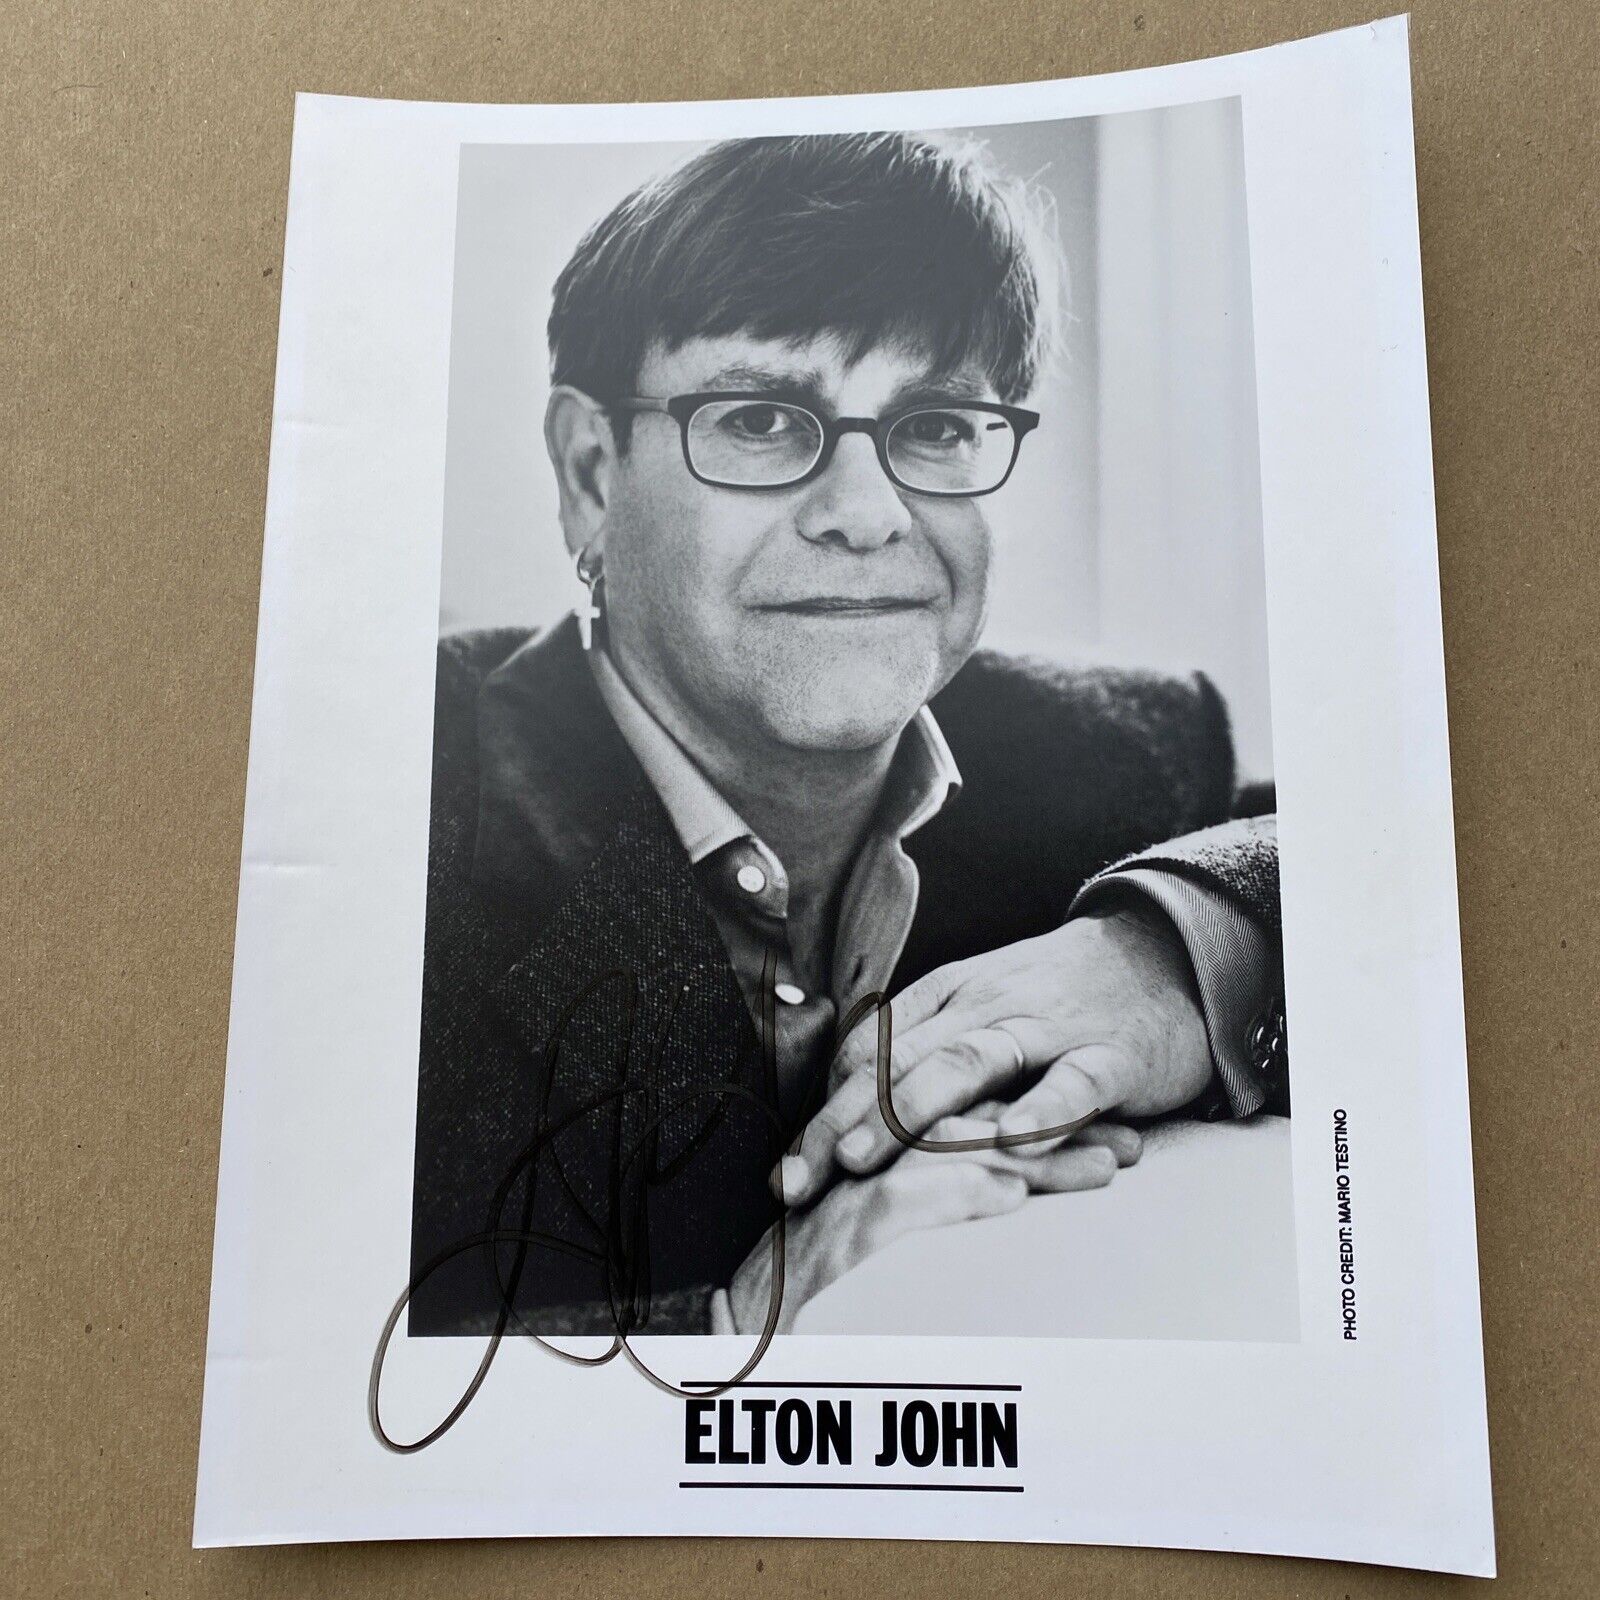 Elton John signed in-person promotional photo